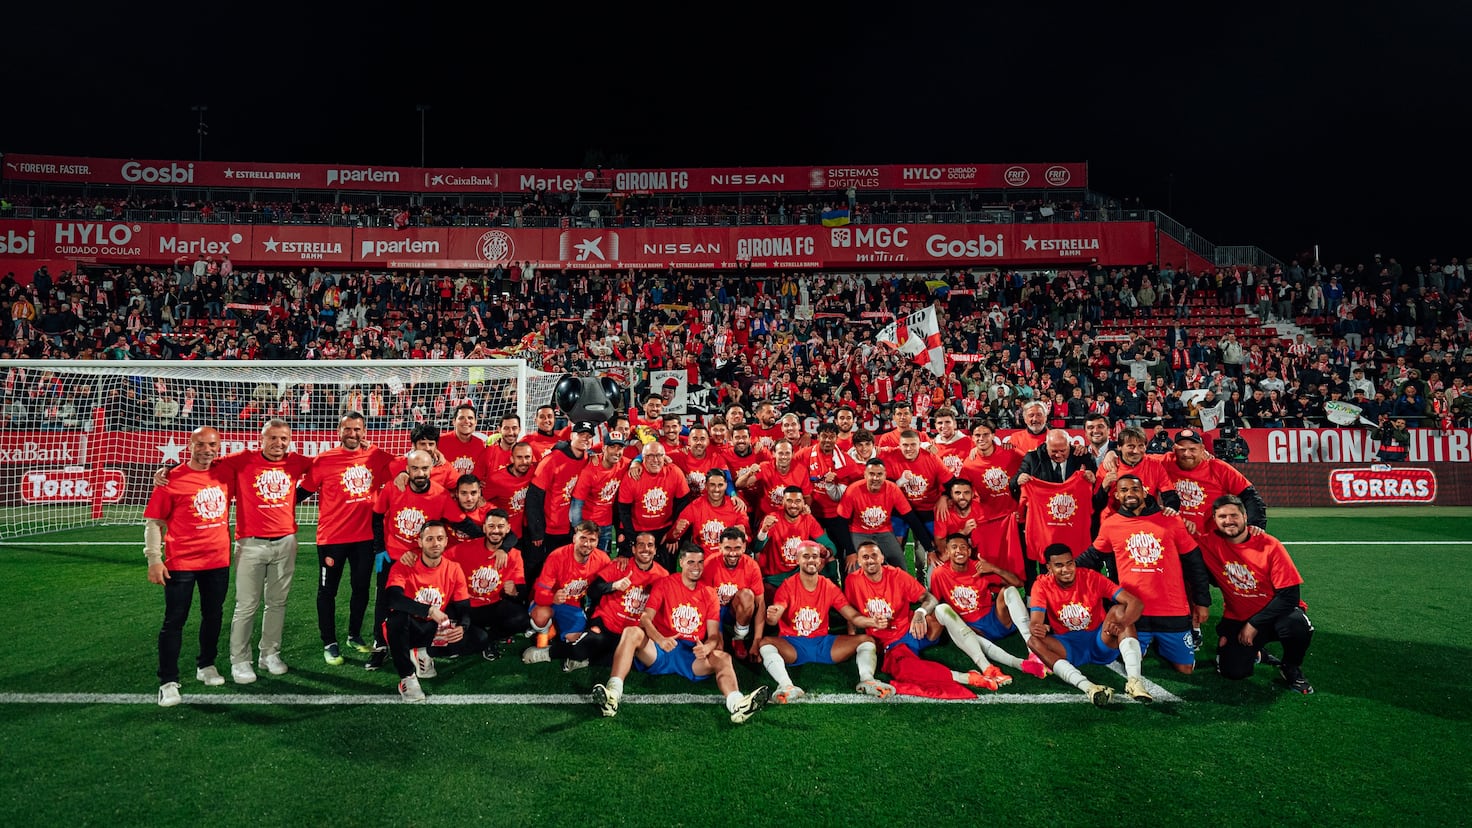 Girona FC's Miraculous Journey: On the Brink of a Champions League Dream